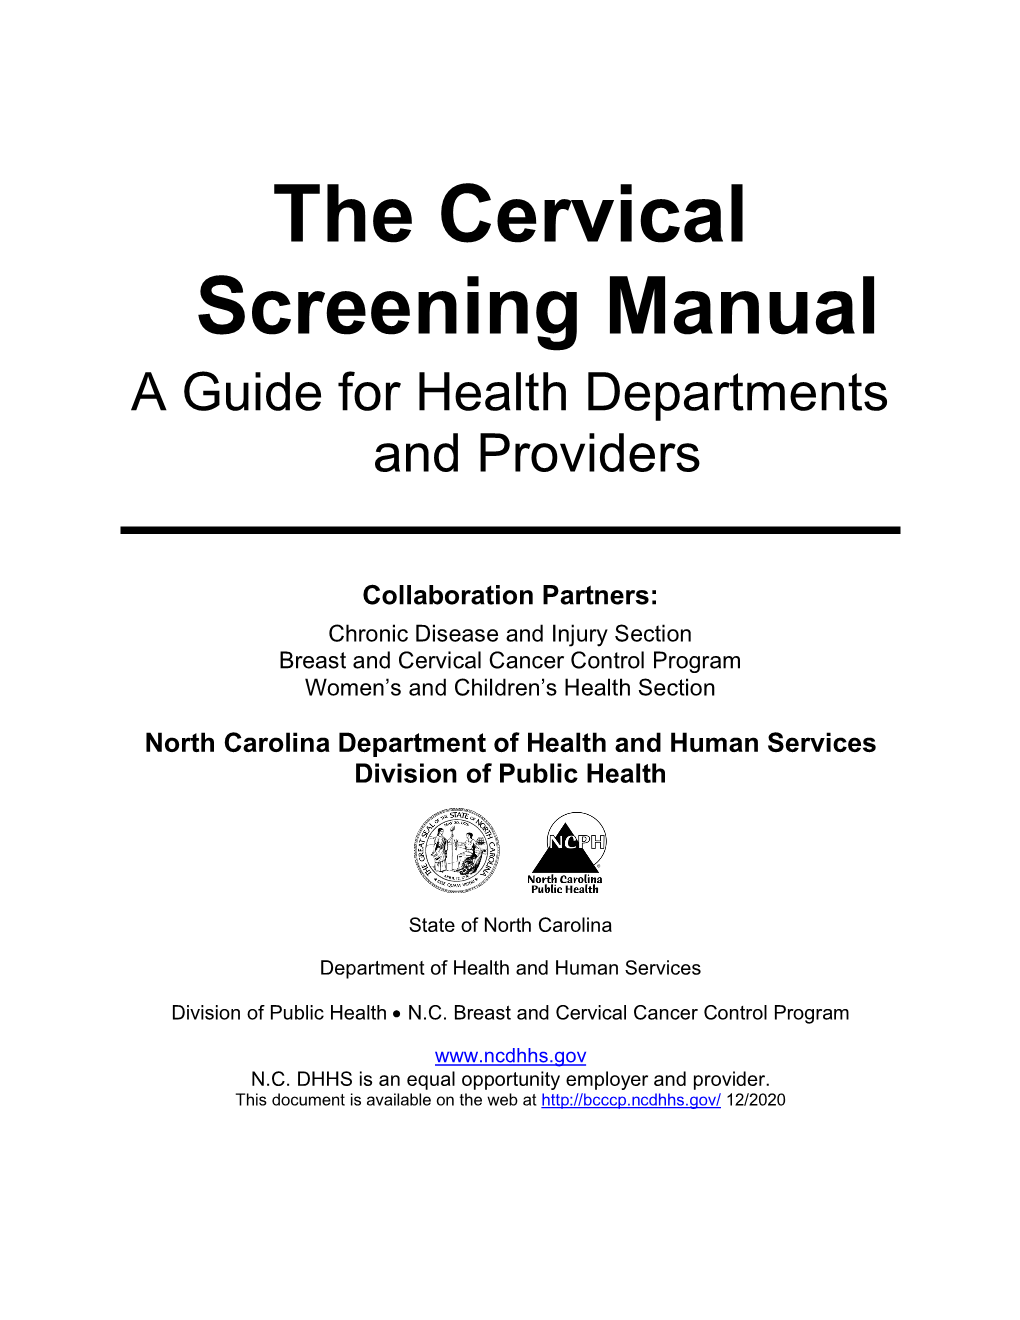 The Cervical Screening Manual a Guide for Health Departments and Providers